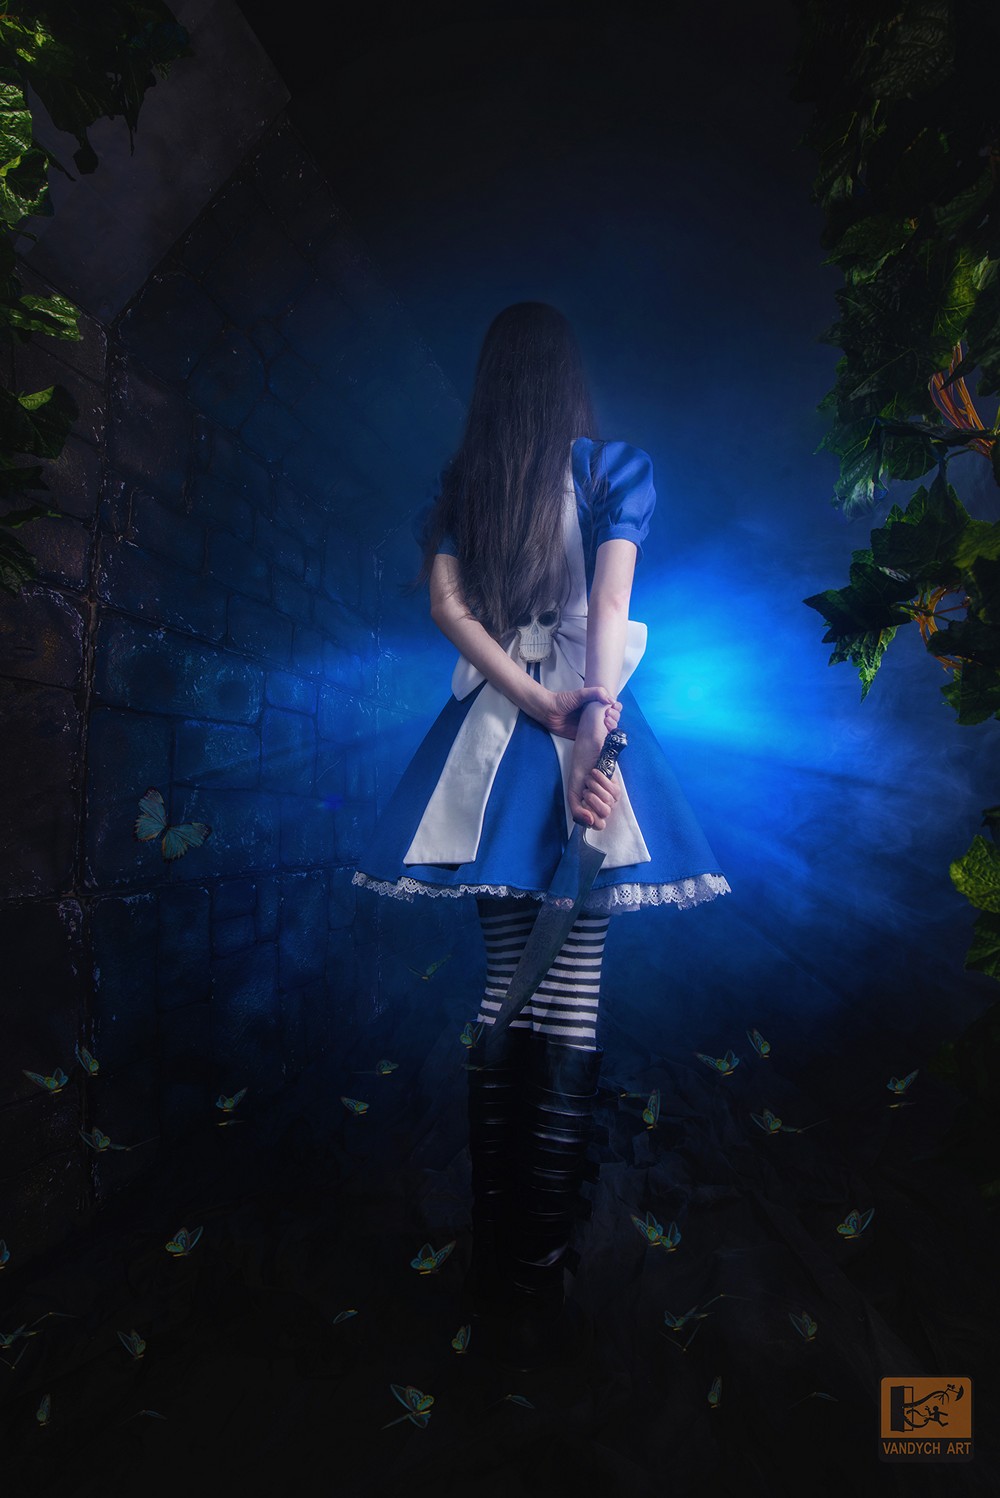 [Cosplay] Vandych - Alice Madness Returns (24 January 2022) - COSPLAY -